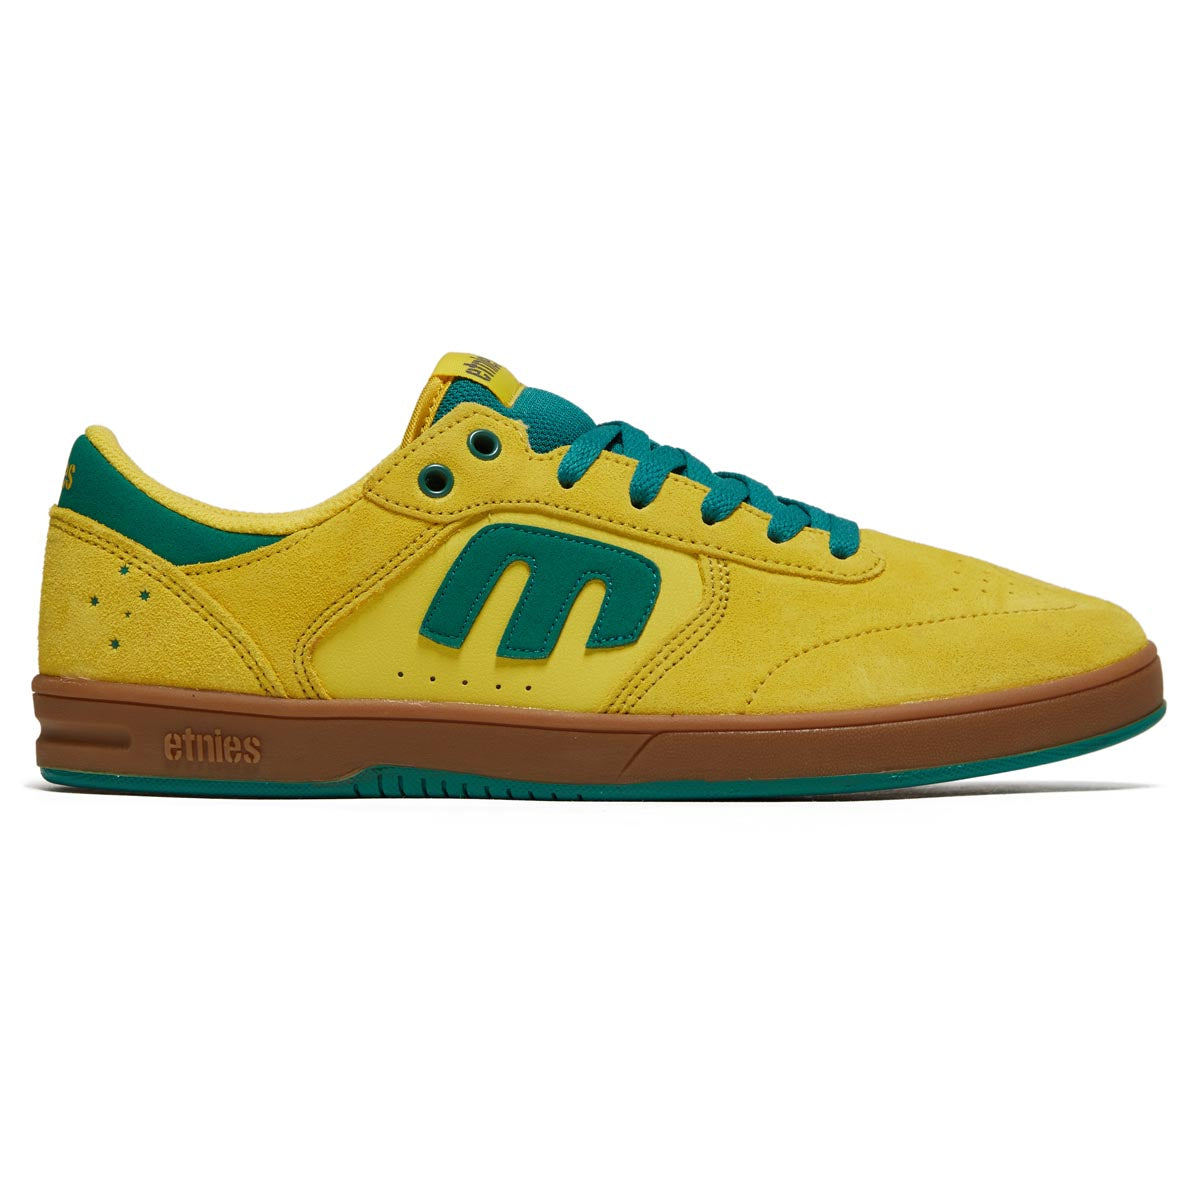 Etnies Windrow Shoes - Yellow image 1